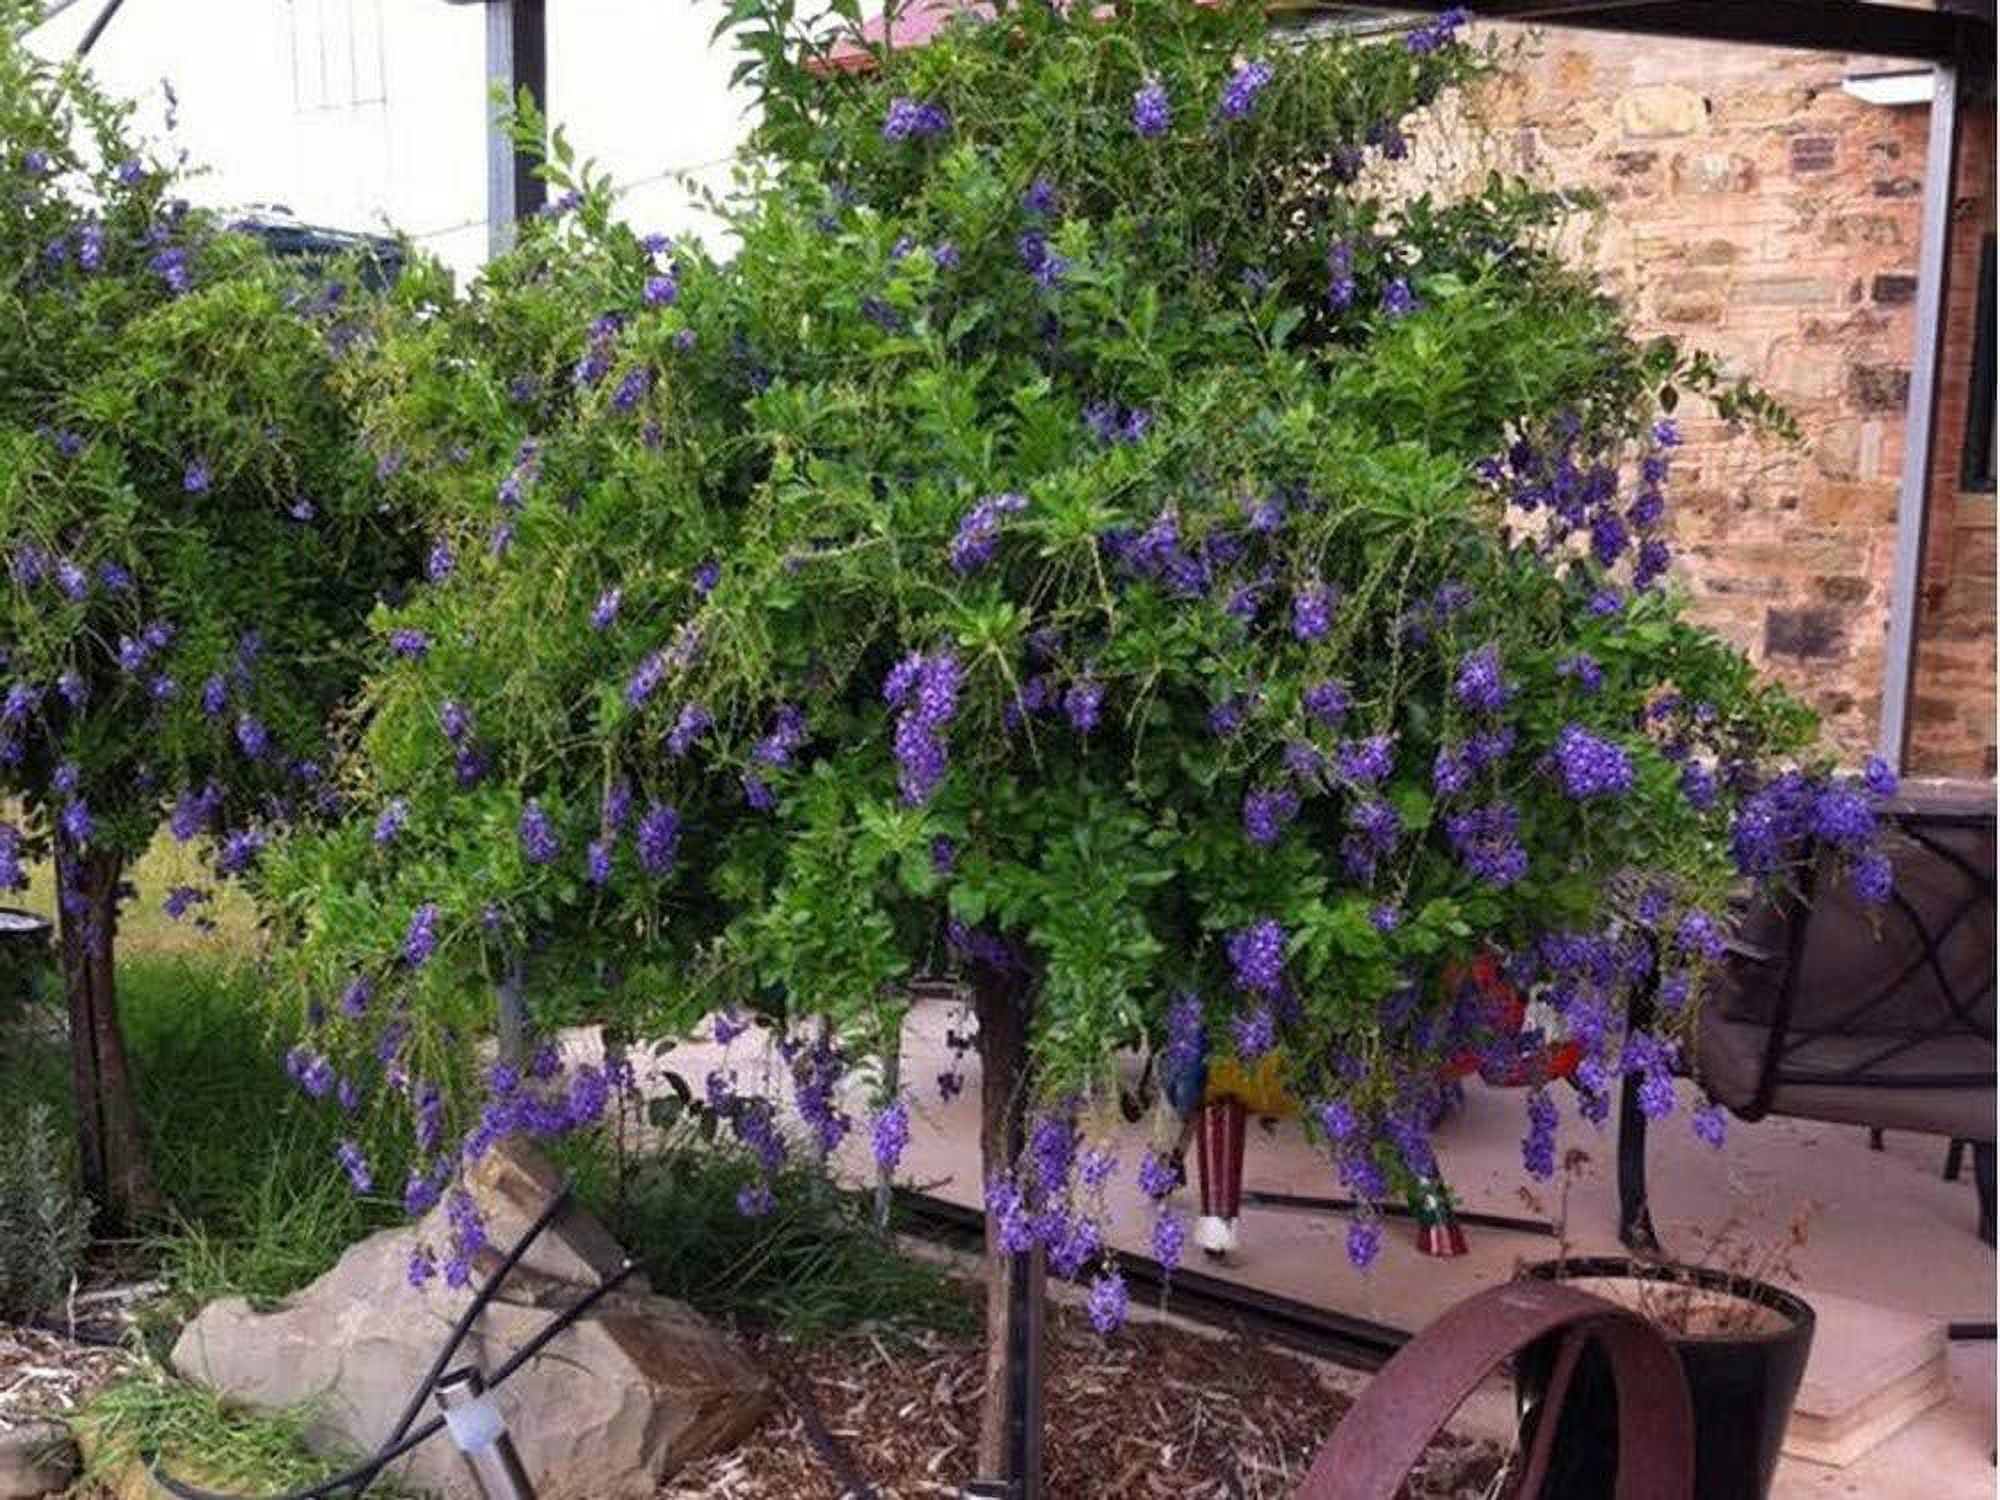 Sapphire Showers Duranta - Live Plant in a 10 Inch Pot - Duranta Erecta "Sapphire Showers" - Beautiful Flowering Butterfly Attracting Patio Plant - image 5 of 6